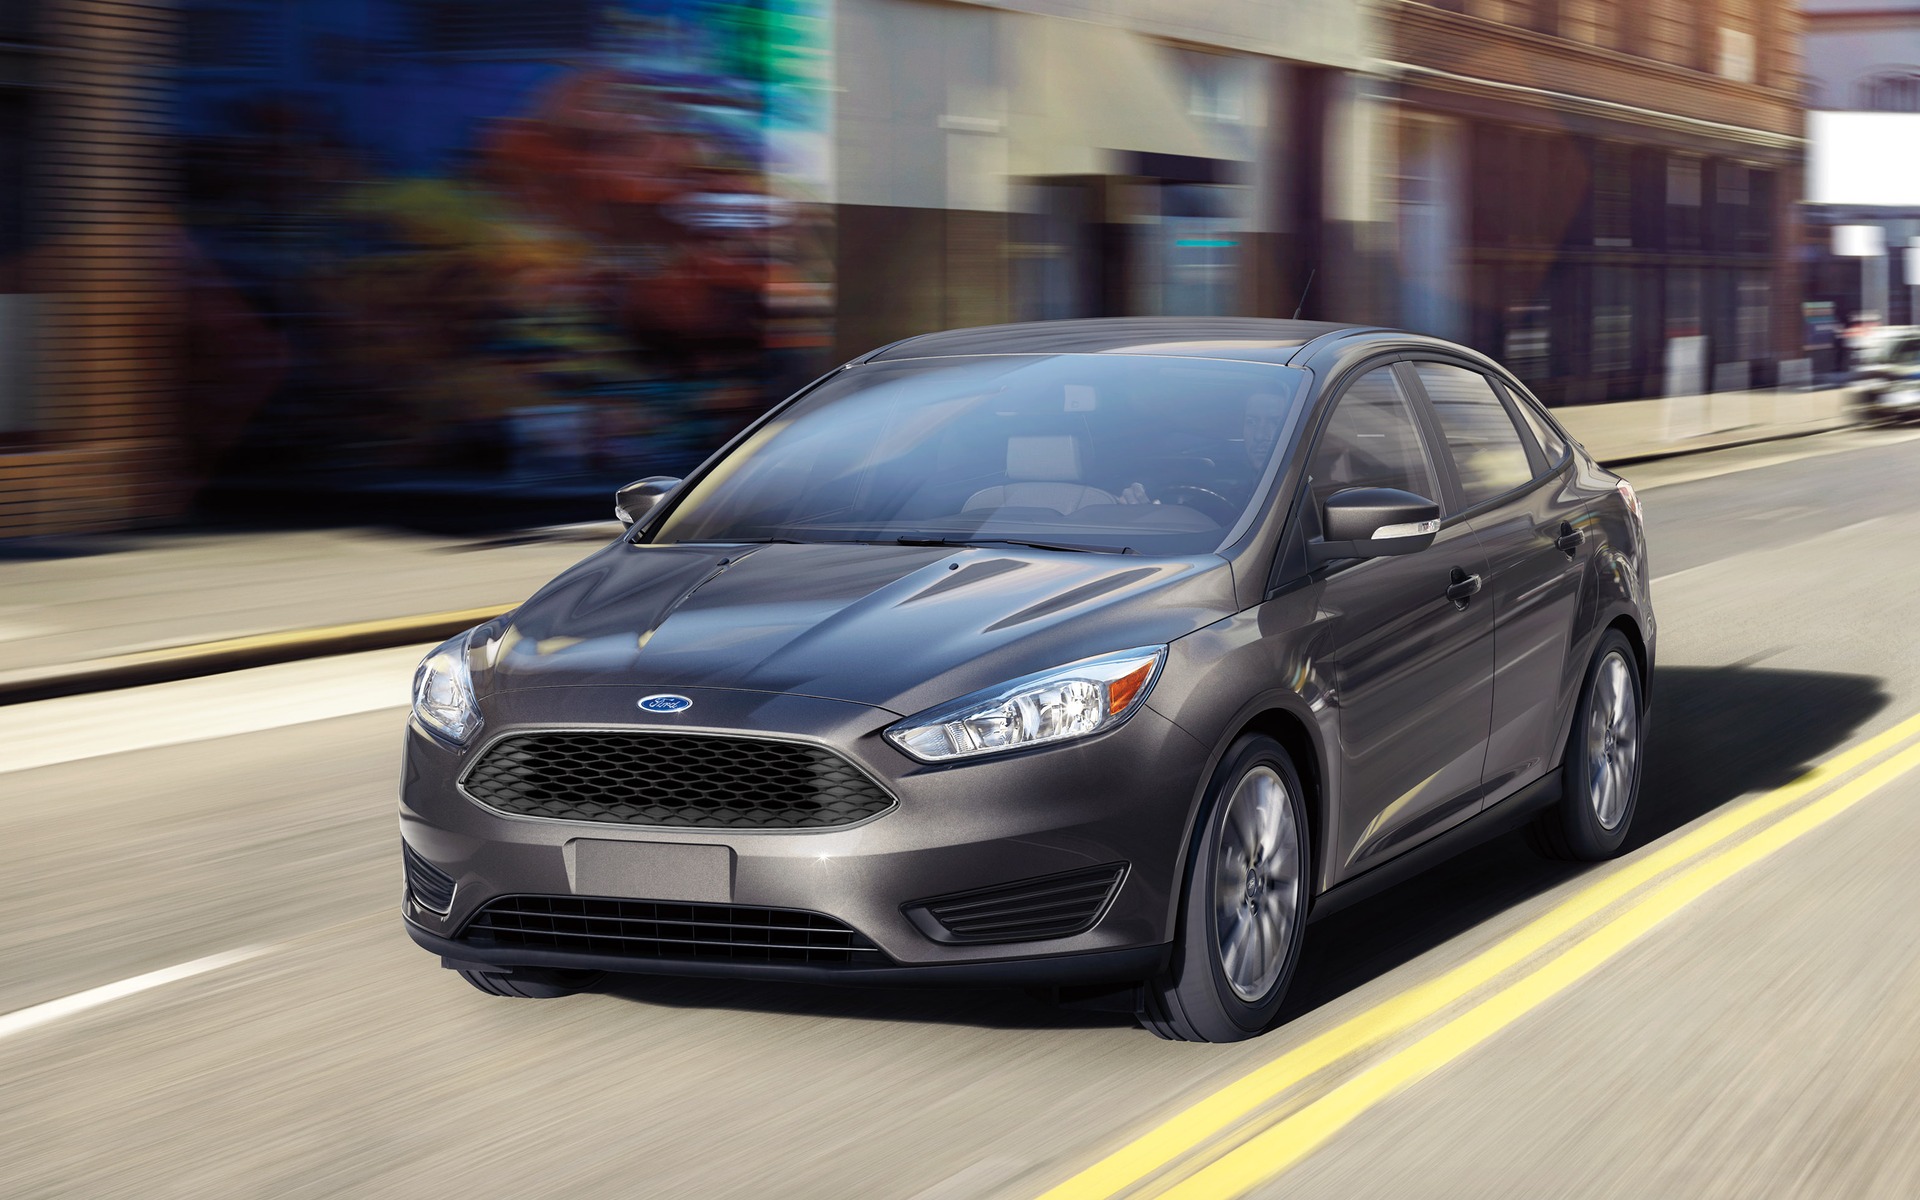 10 best cars similar to the Ford Focus